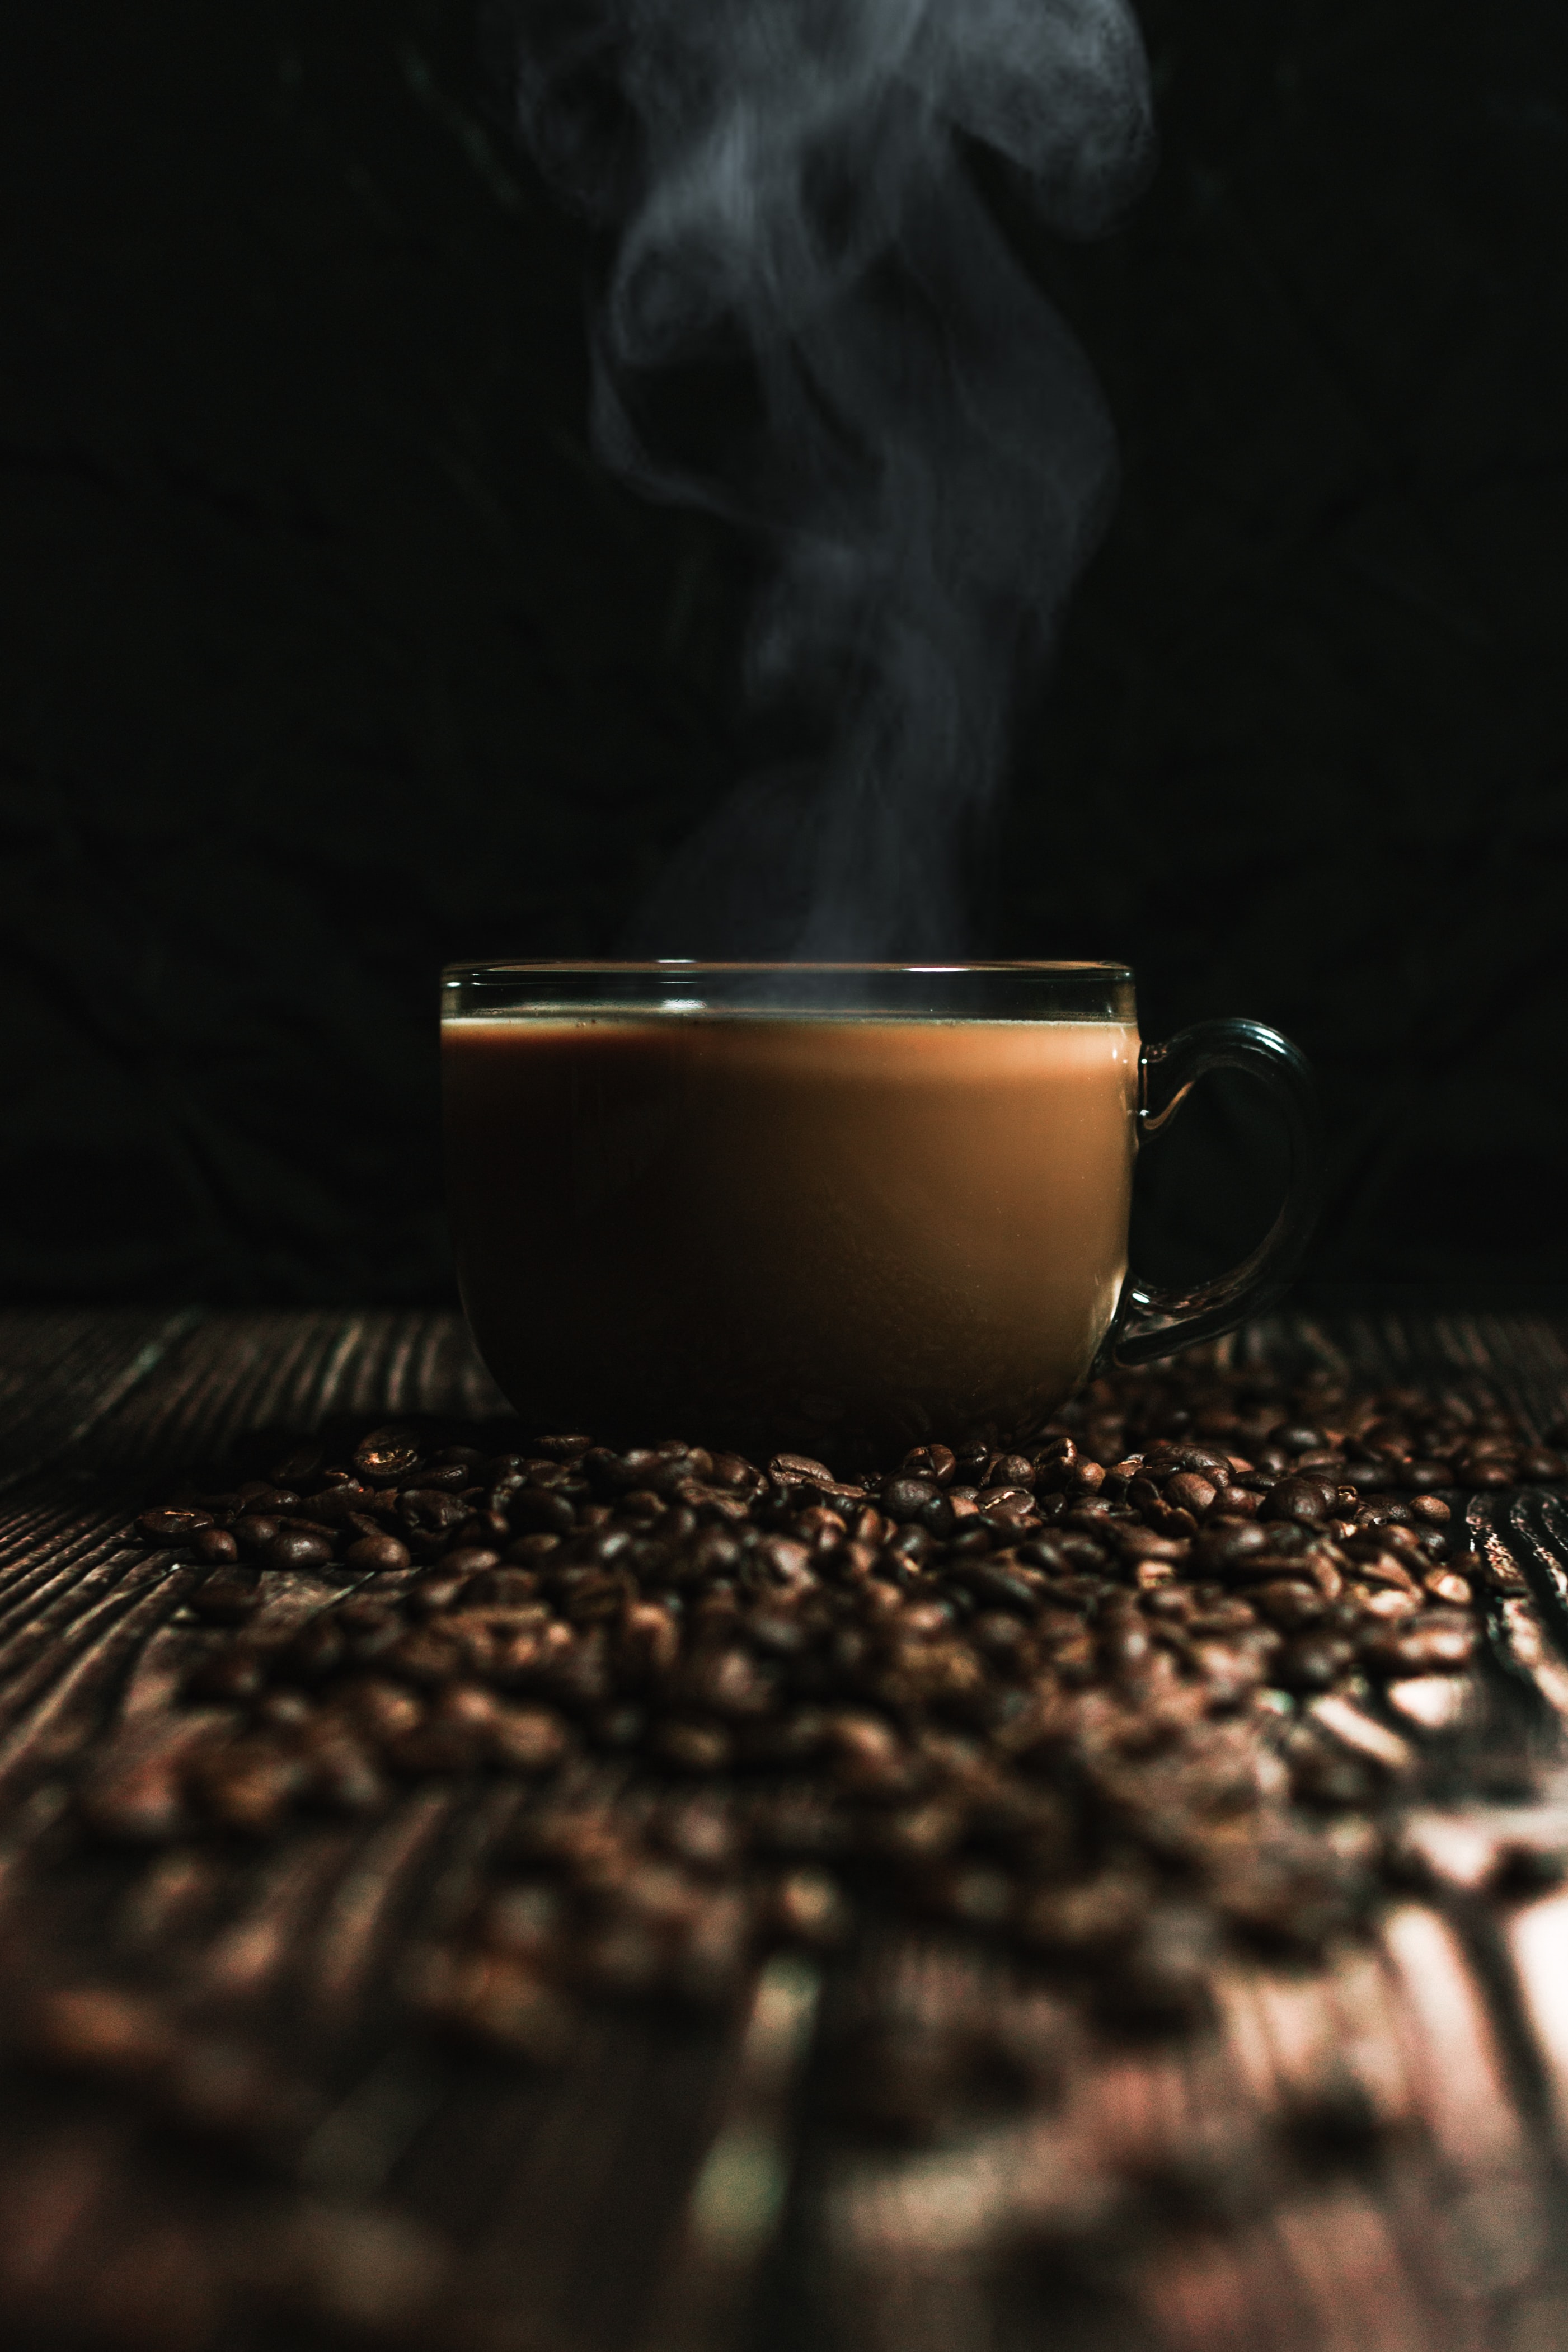 126293 download wallpaper food, coffee, cup, drink, beverage, steam, coffee beans screensavers and pictures for free